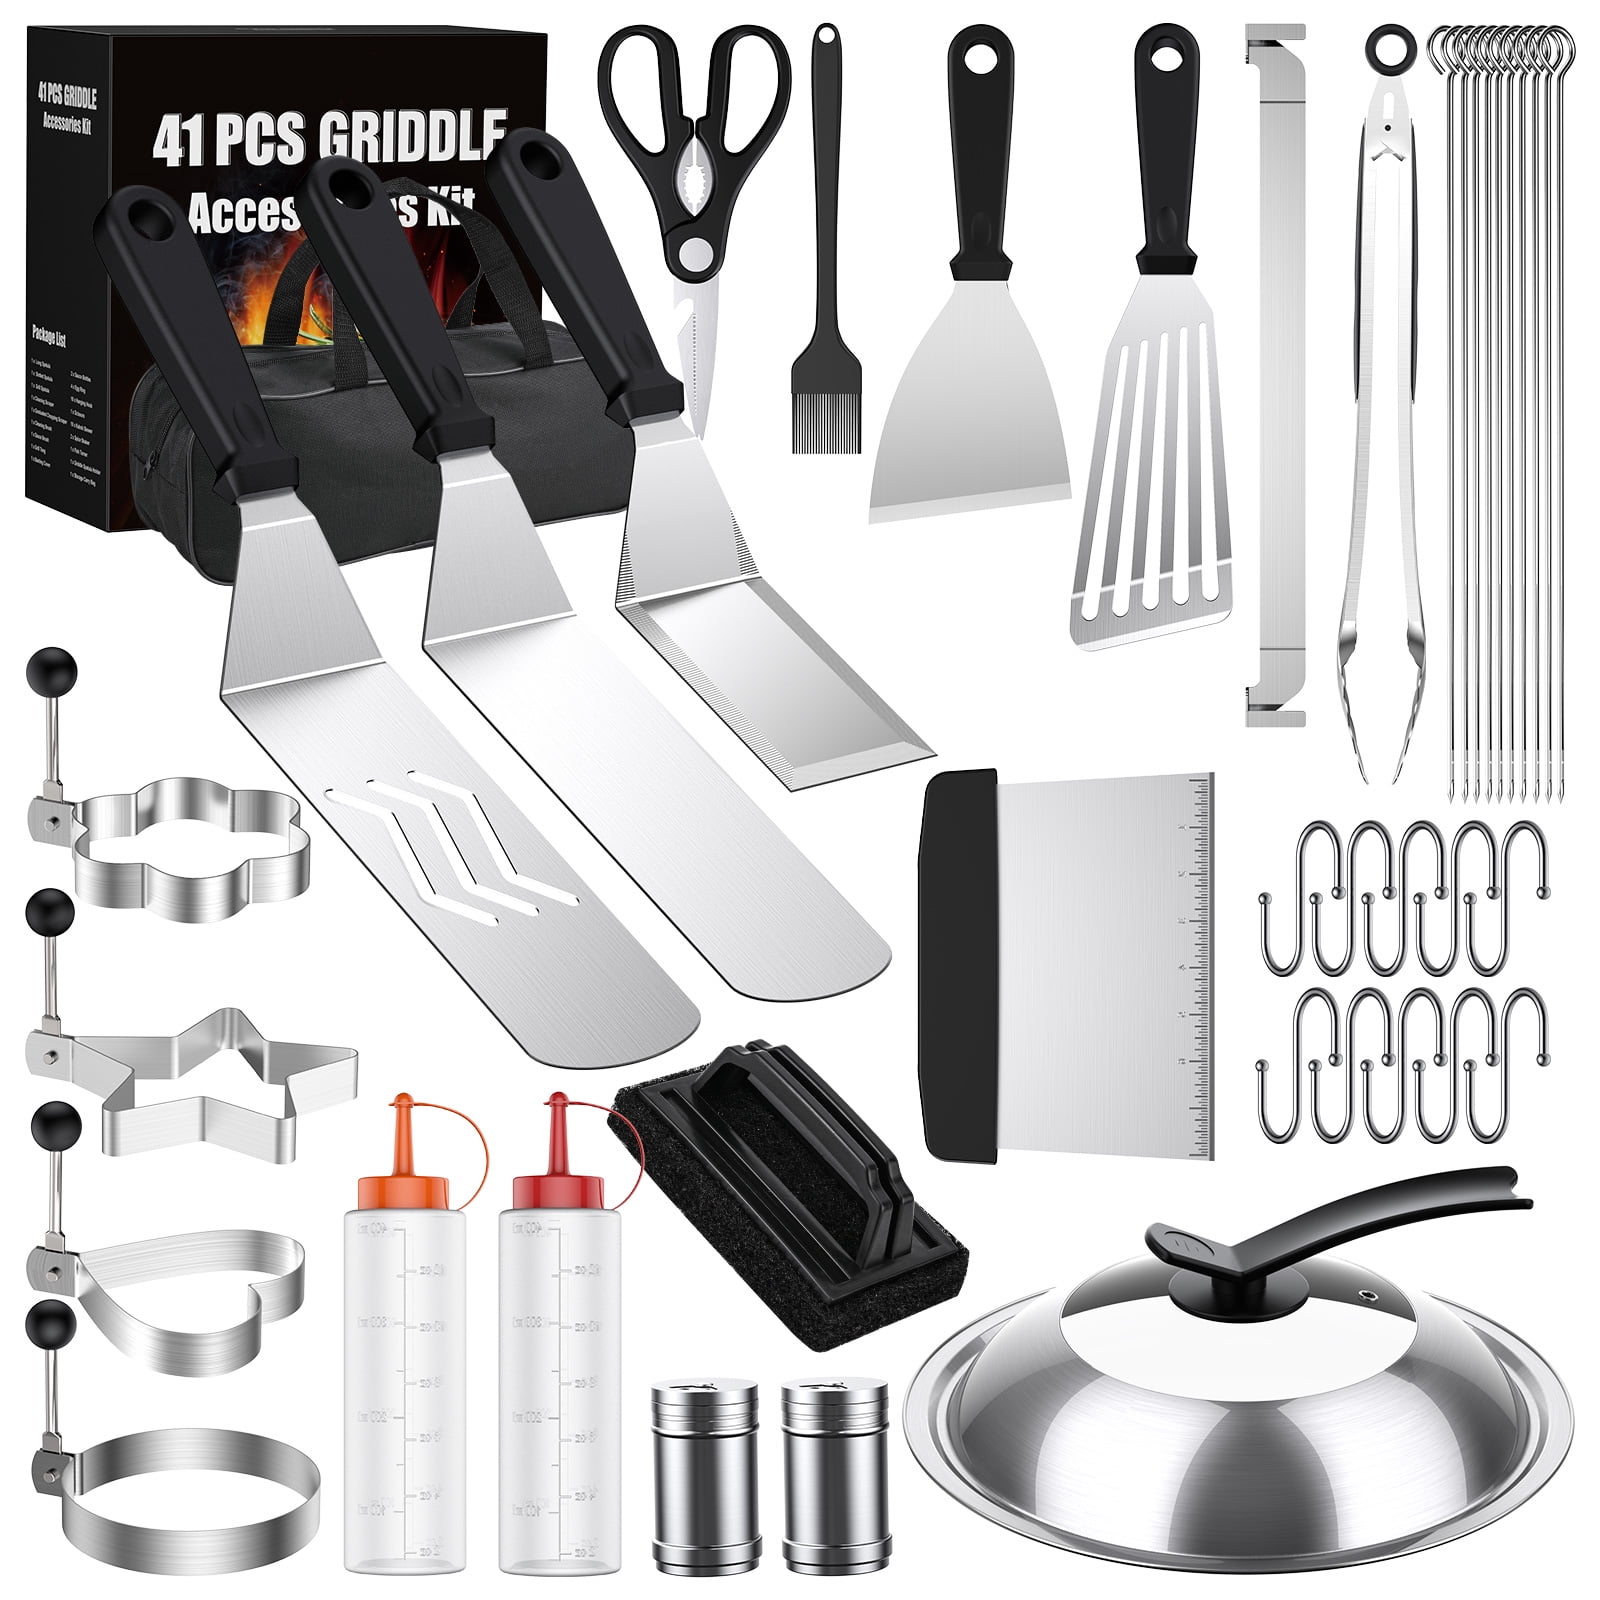 KEPDTAI BBQ Grill Accessories Kit, 36Pcs Extra Thick Stainless Steel Barbeque  Tools, Grilling Accessories for Outdoor Grill, Camping Grill Utensils Set  with Aluminum Case, Grilling Gifts for Men Women - Yahoo Shopping